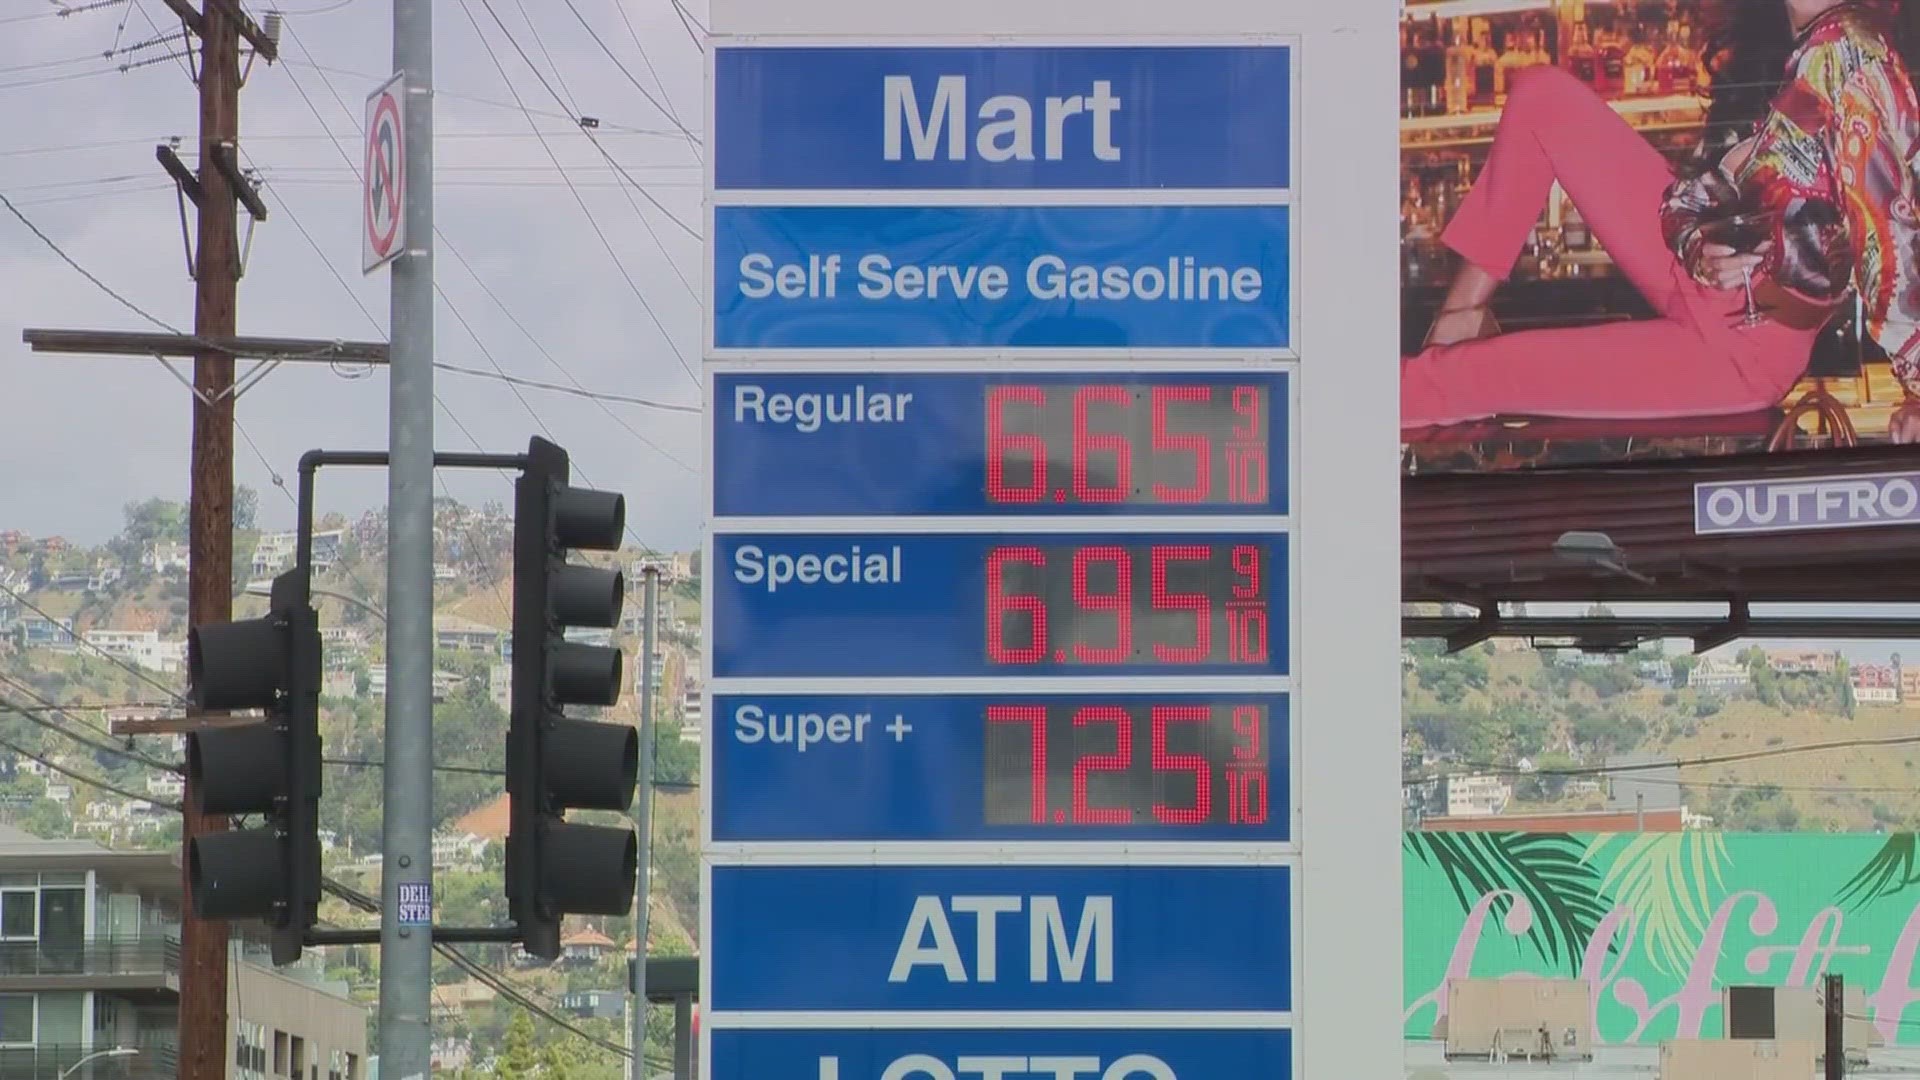 There are international ties playing a part in the price hike at U.S. gas stations.